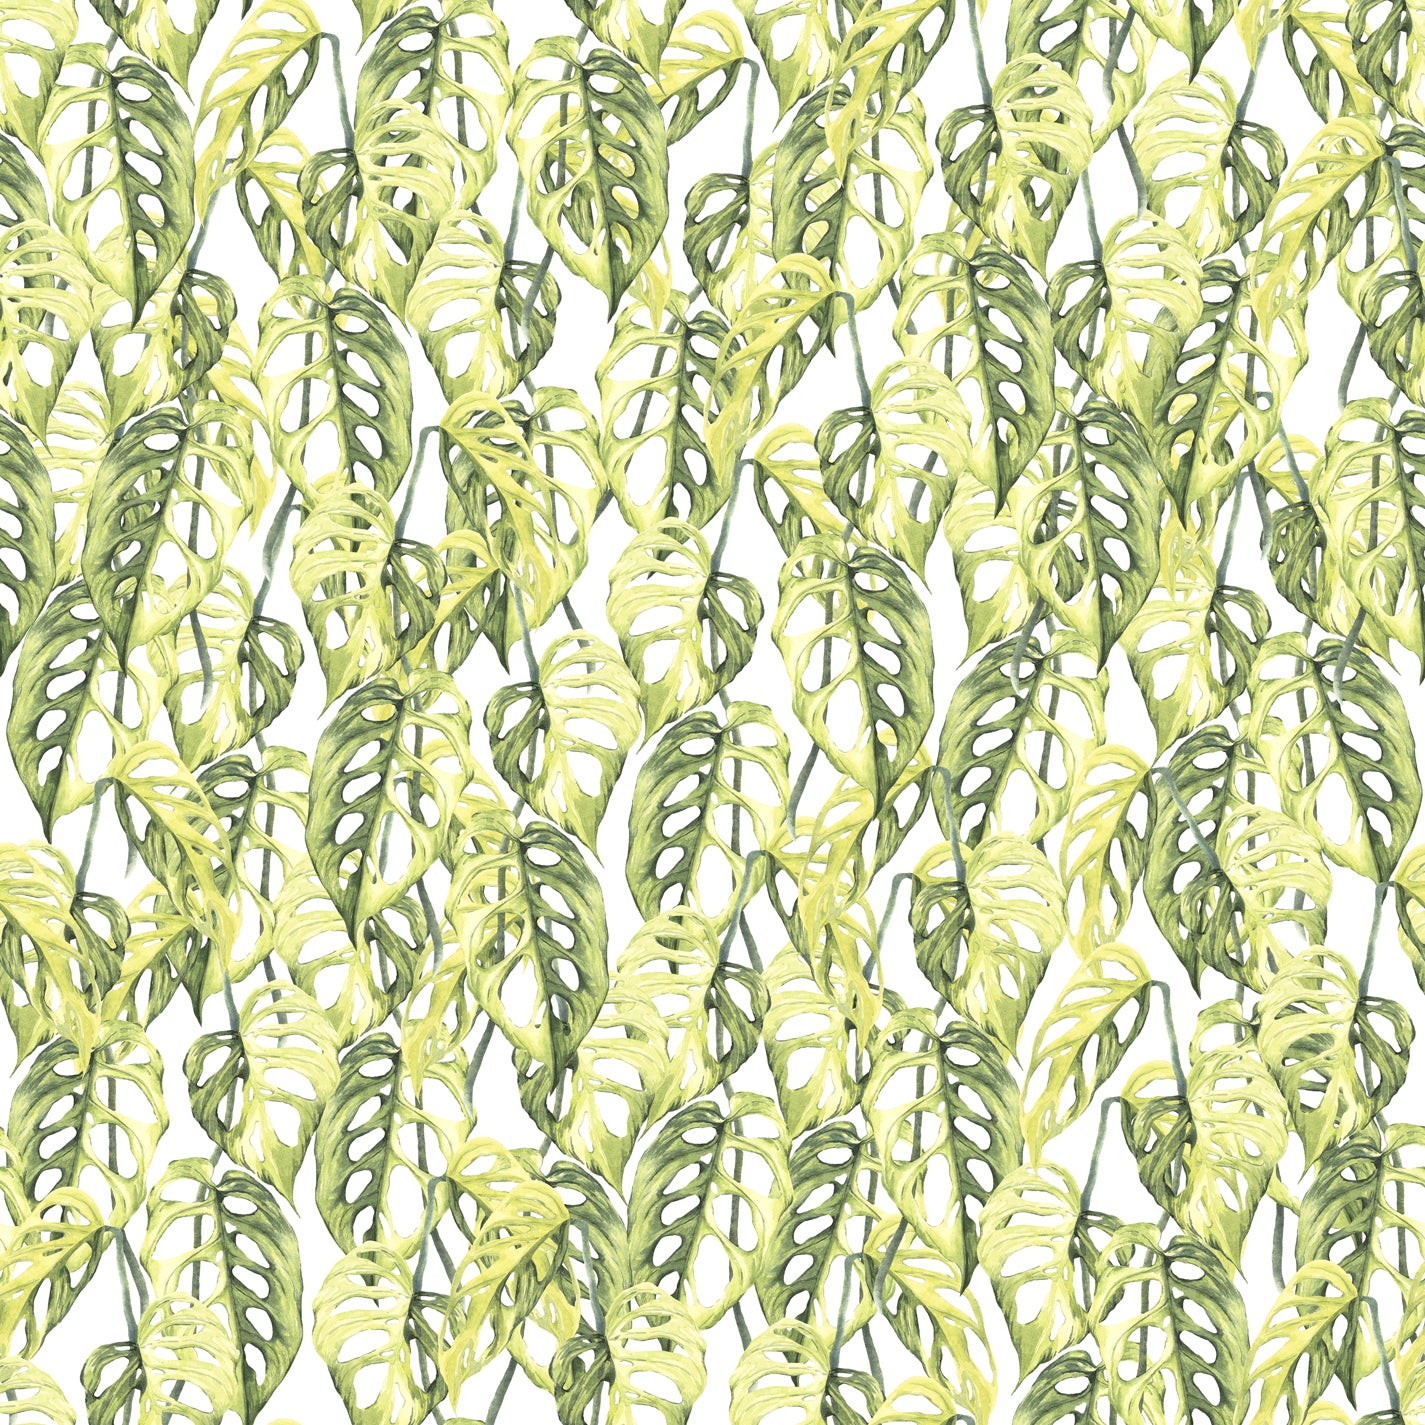 "Wall Blush Virdis Wallpaper featuring tropical leaf pattern in a bright, airy room setting."